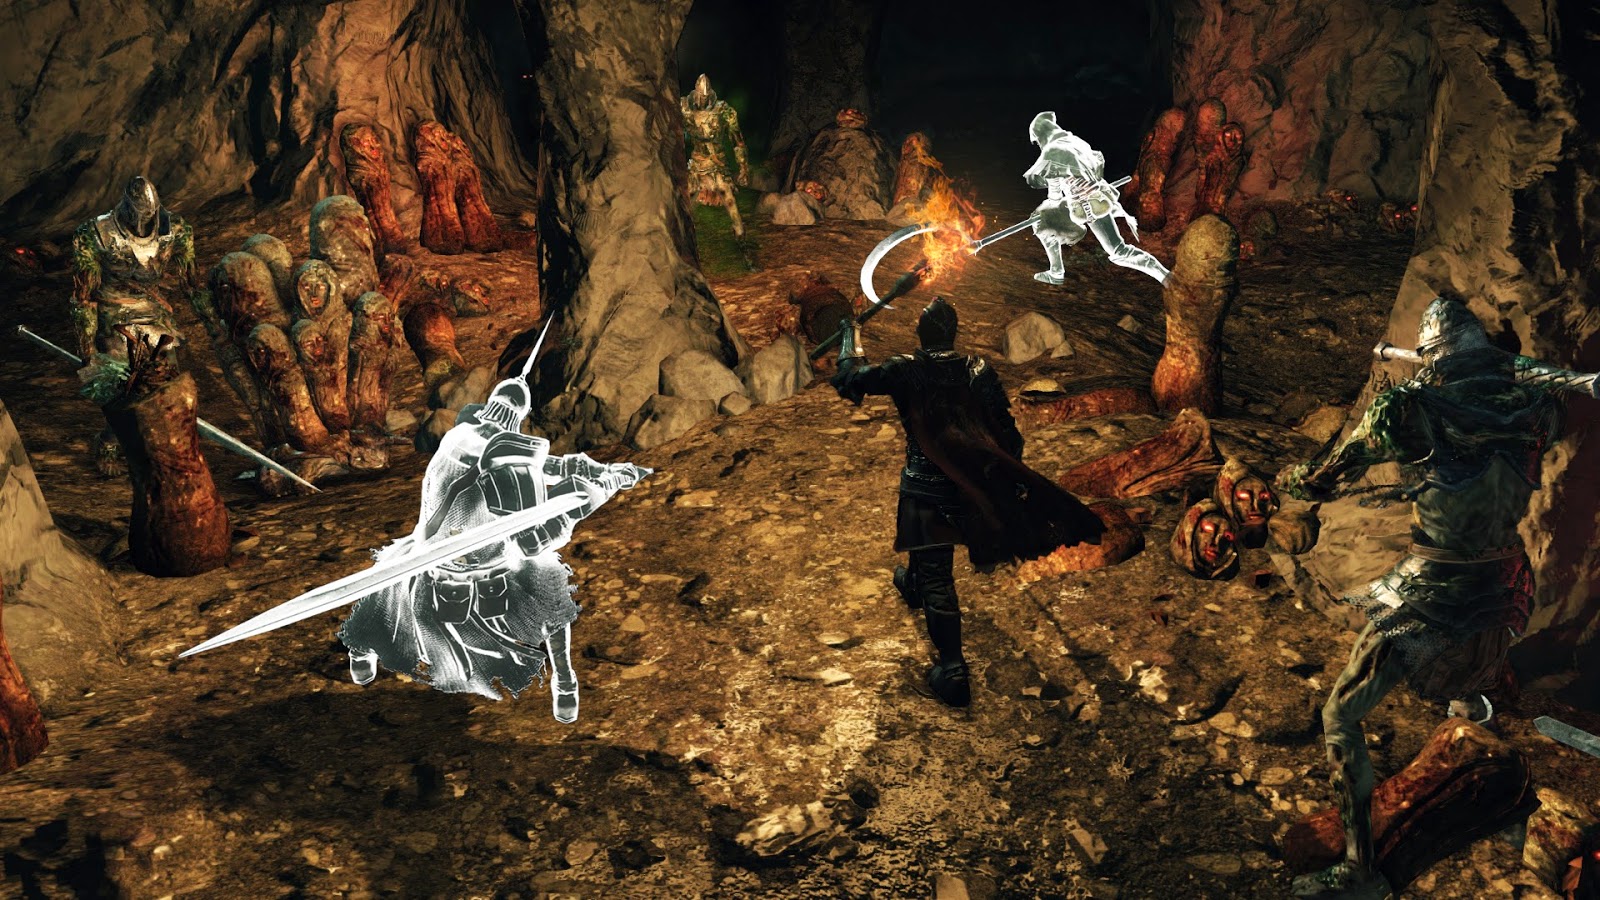 Dark Souls 2 review: not the end